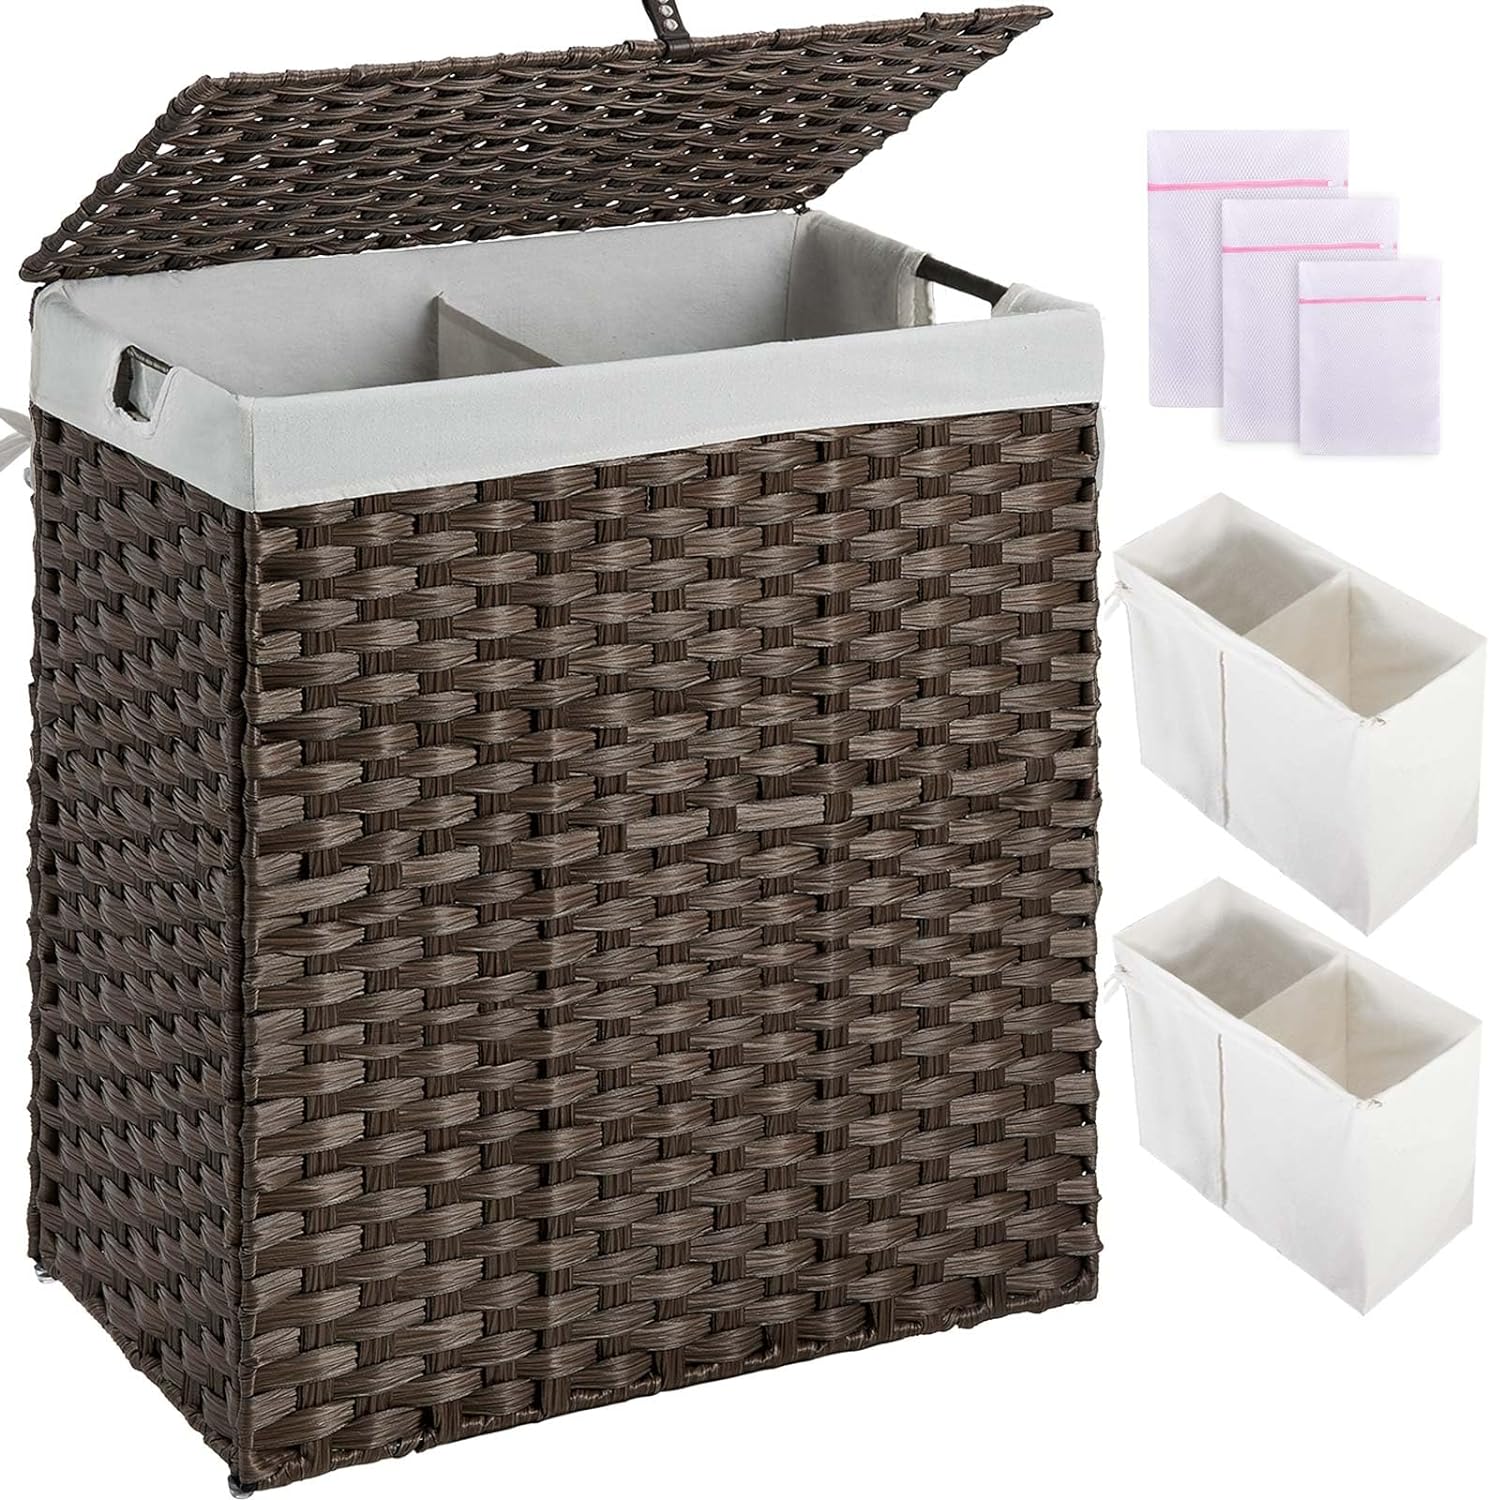 I recently purchased the laundry hamper with lid, and I must say it has exceeded my expectations in both functionality and style, just what I needed. It not only serves its primary purpose but looks very nice in the closet. It is plastic-rattan, but I think that' preferable to regular rattan for durability.One of the standout features of this hamper is its zero-install-needed design. I appreciate the hassle-free setup, allowing me to start using it right out of the box, with just a couple folds